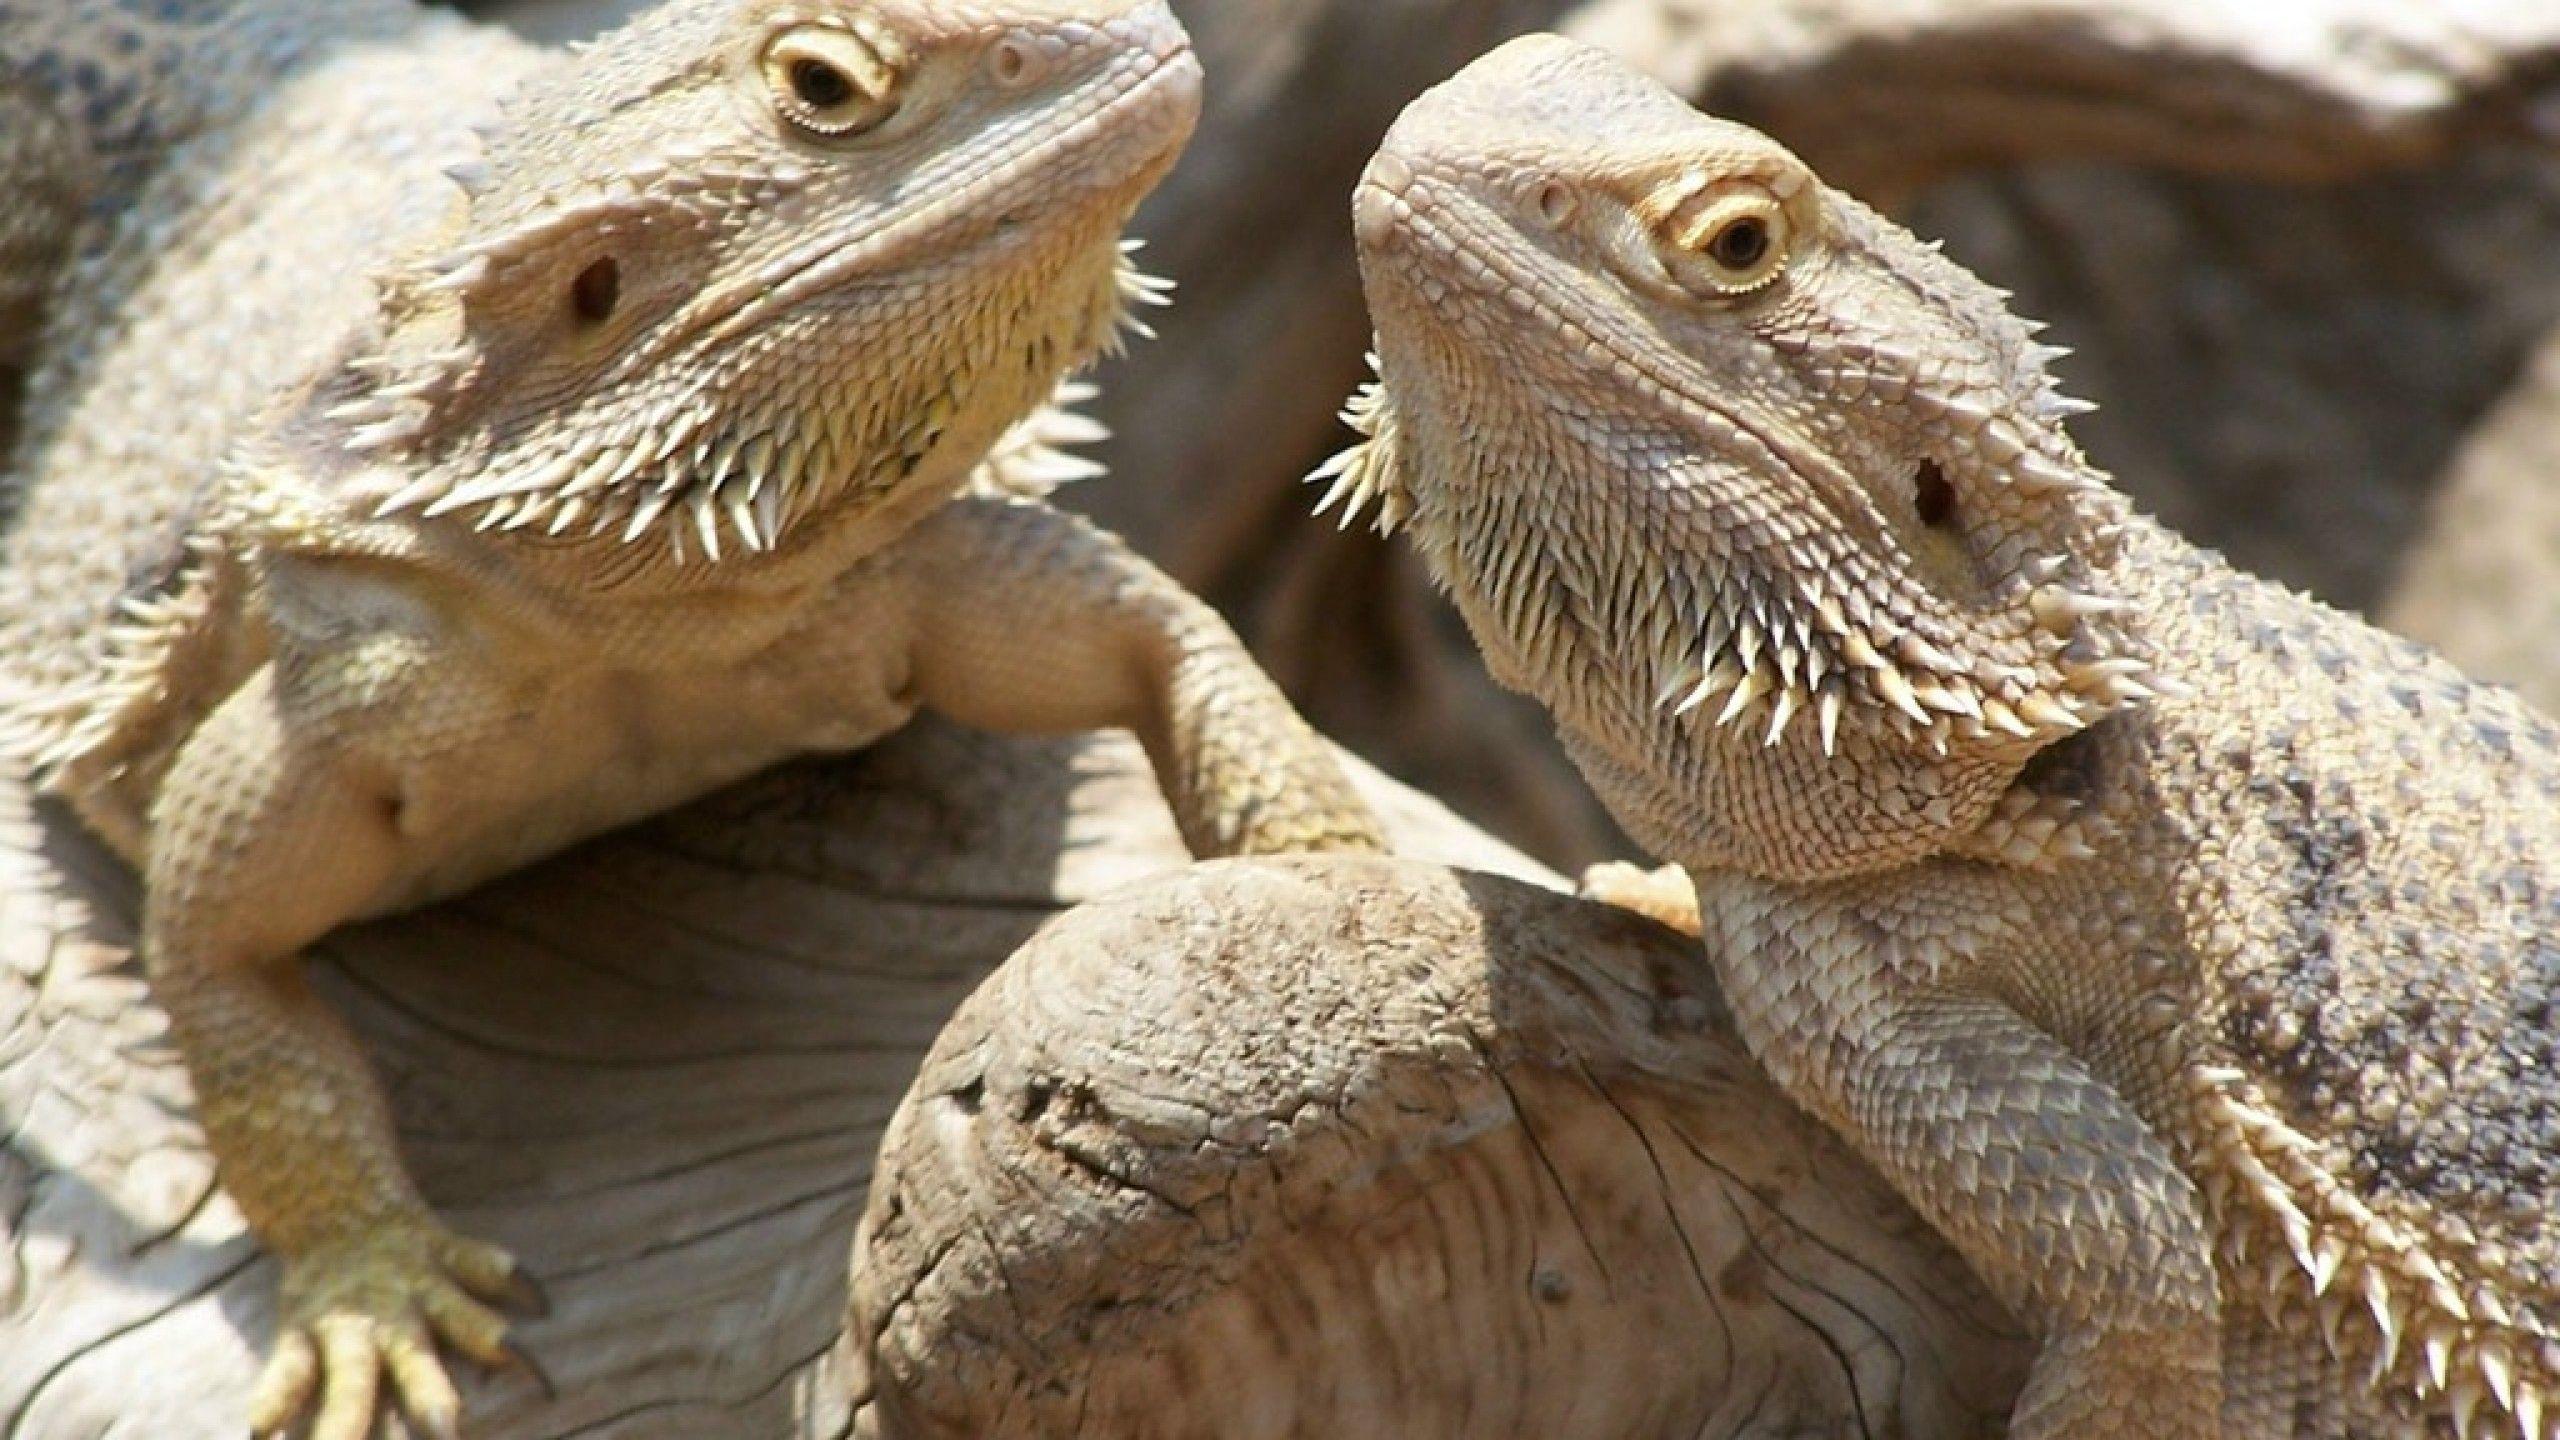 lizards image Bearded Dragons HD wallpaper and background photo